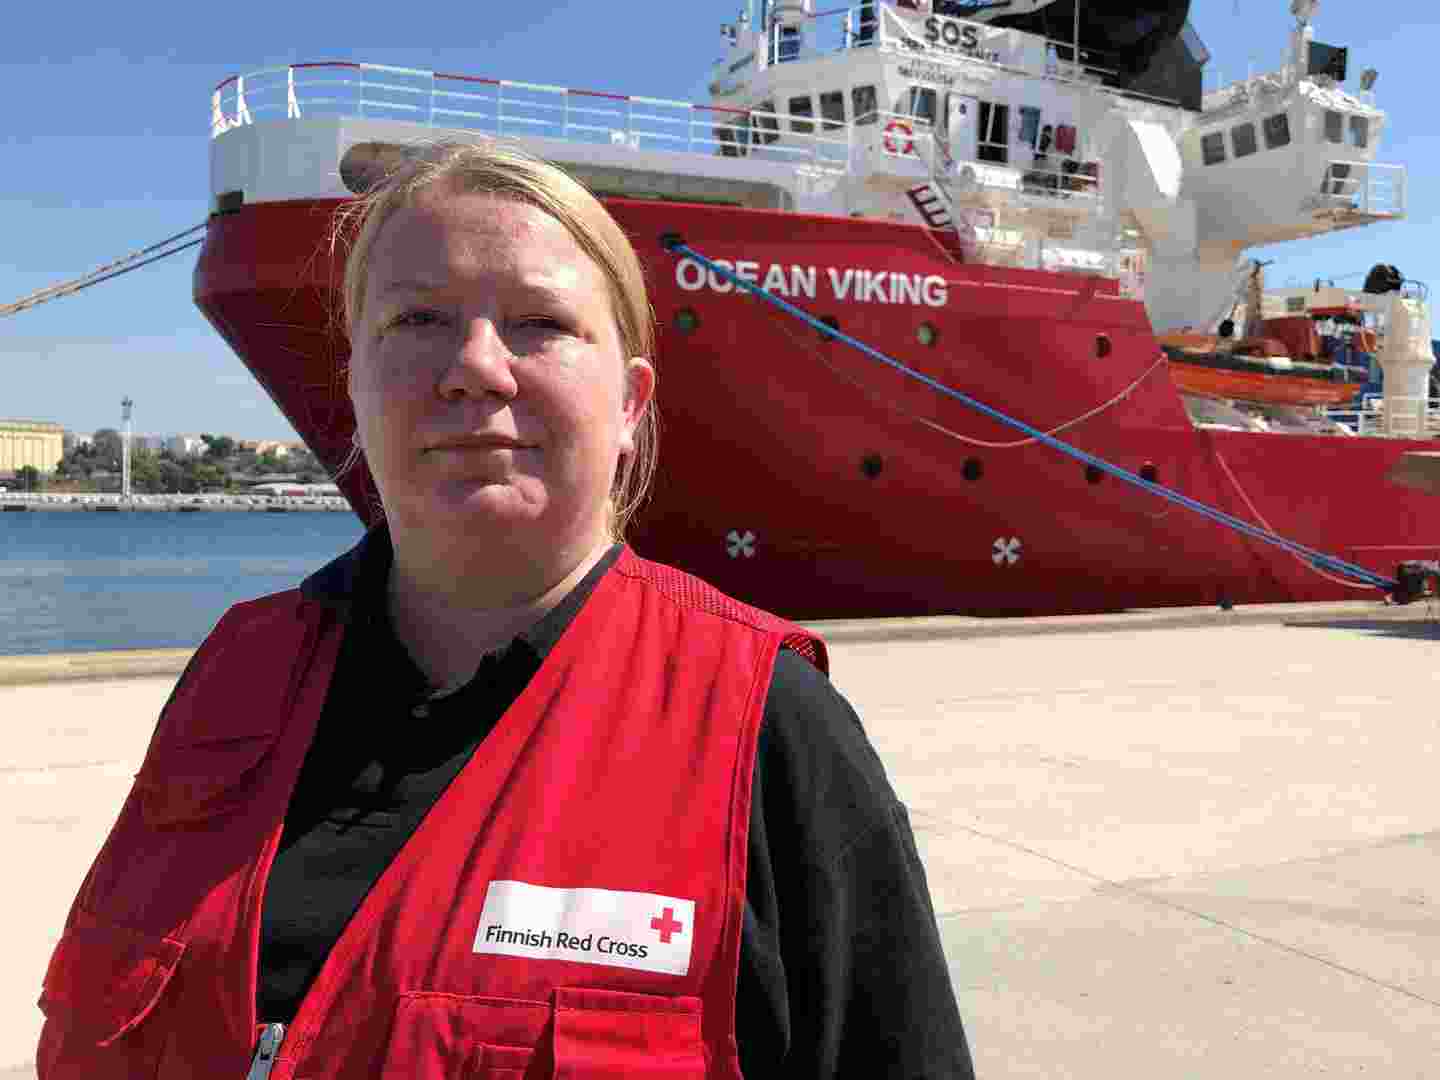 Aid worker wearing Red Cross work clothing standing in front of a ship in a harbour area.